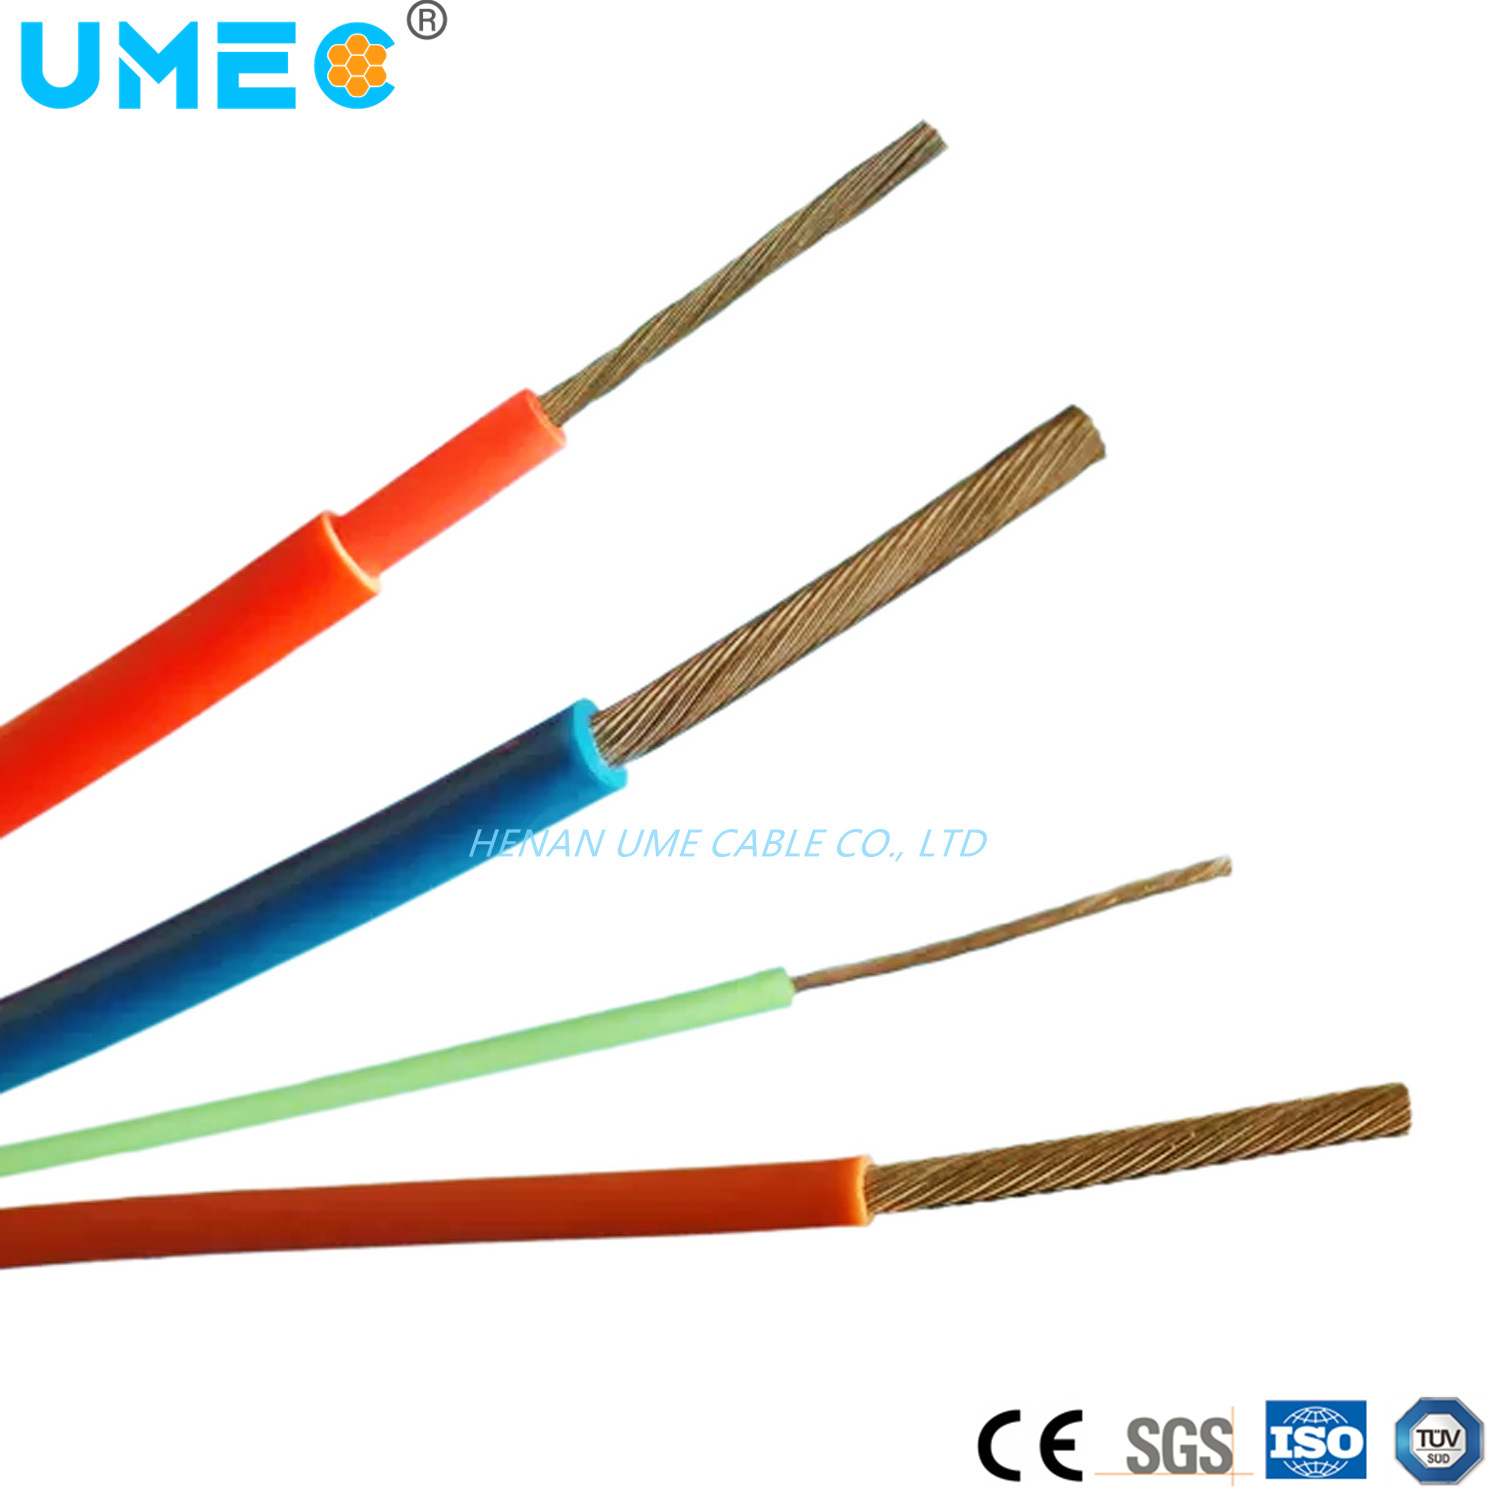 Electrical Wire Factory Price 450/750V PVC Insulated PVC Sheathed 2.5 4 6 10 Sqmm Solid Stranded Conductor BVV Blvv